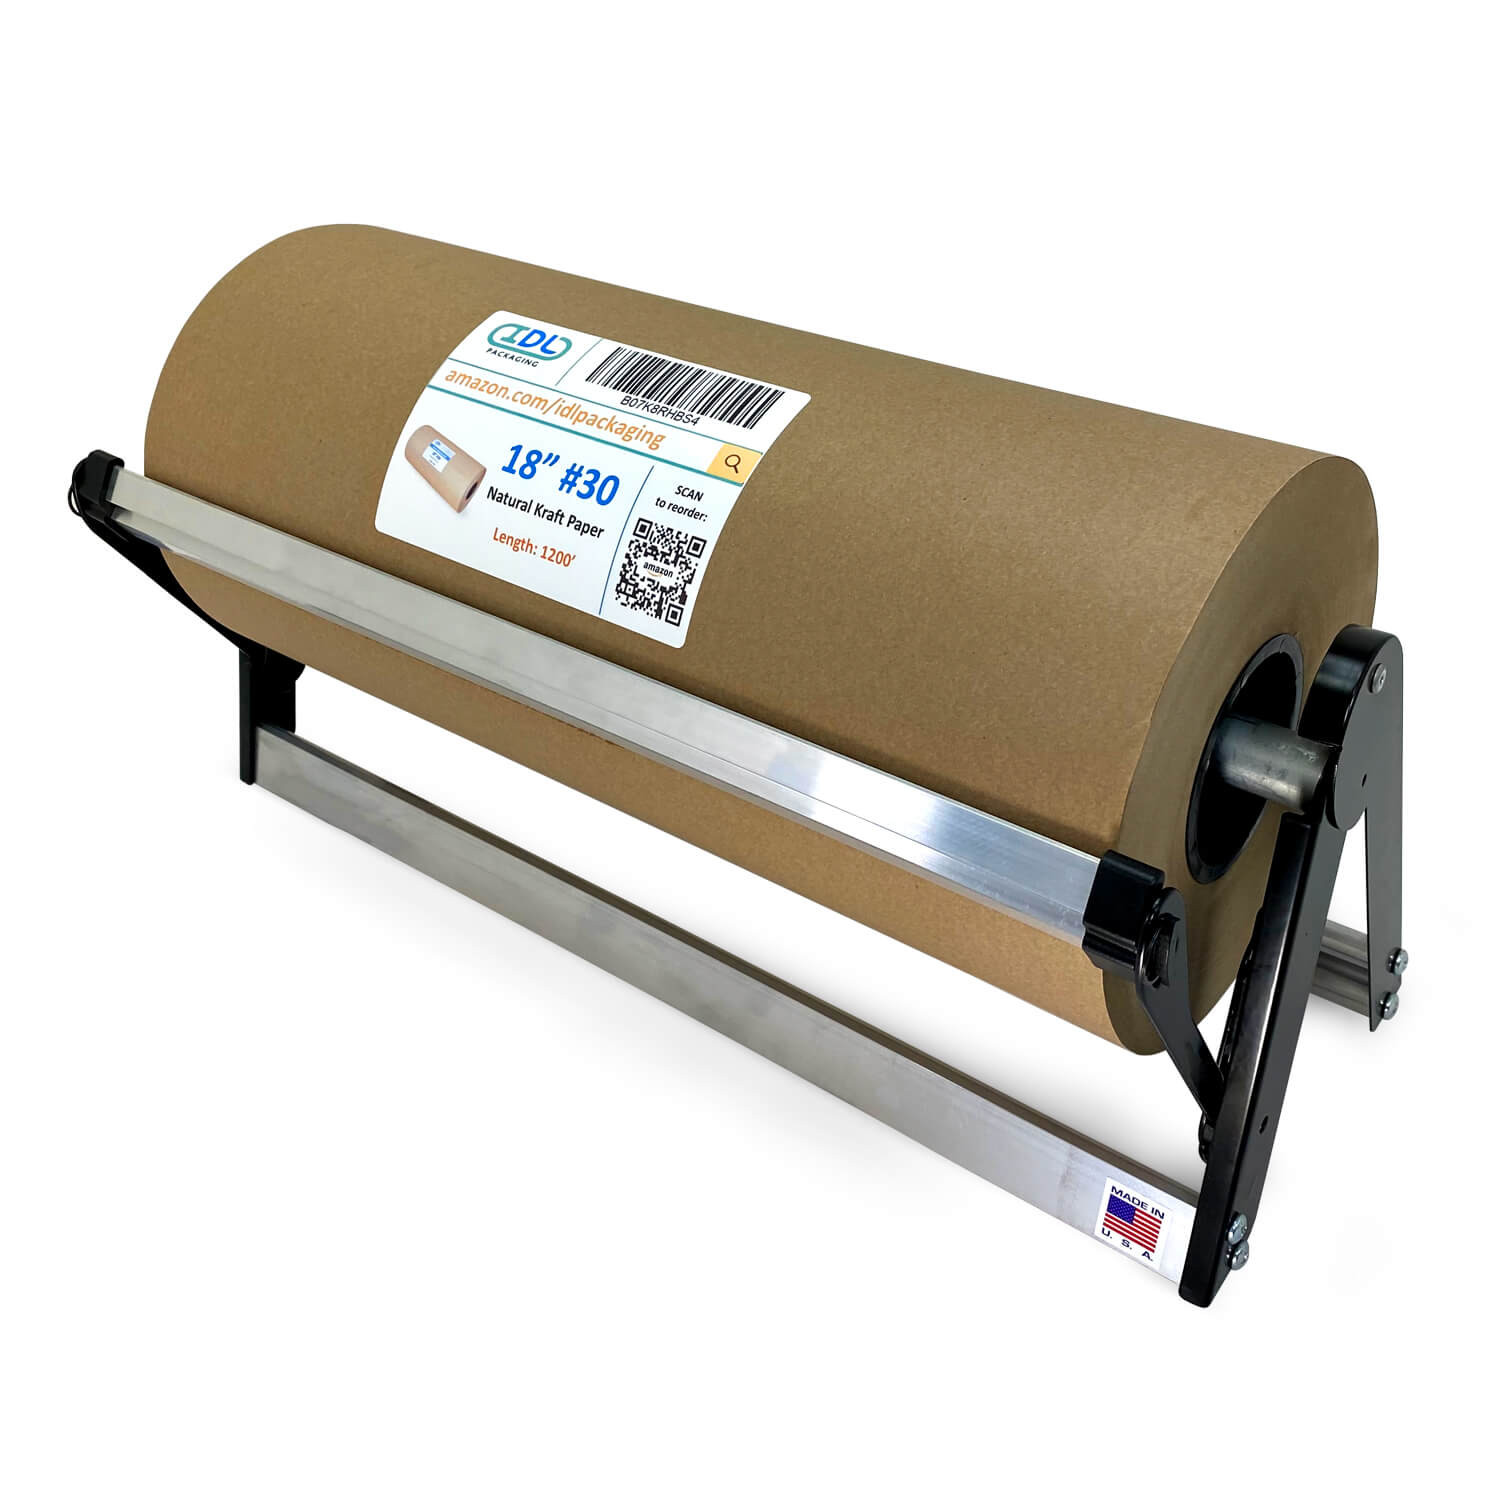 Idl Packaging 18 Kraft Paper Roll Dispenser & Cutter for Rolls Up to 18 Wide and 9 in Diameter – Tabletop Reinforced Steel Paper Holder with A